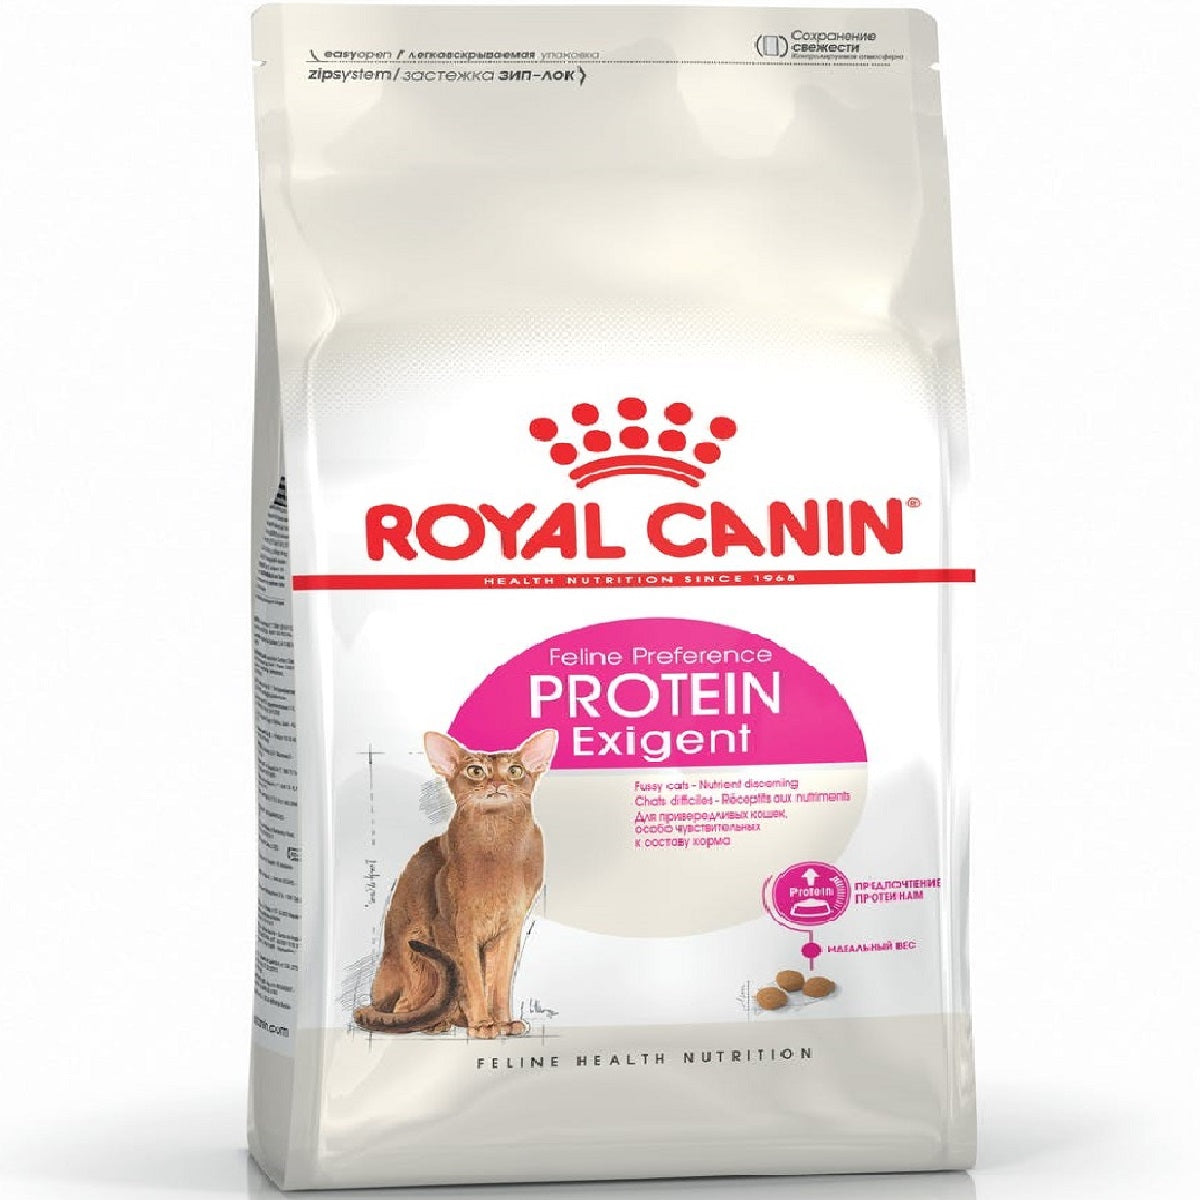 ROYAL CANIN - Protein Exigent